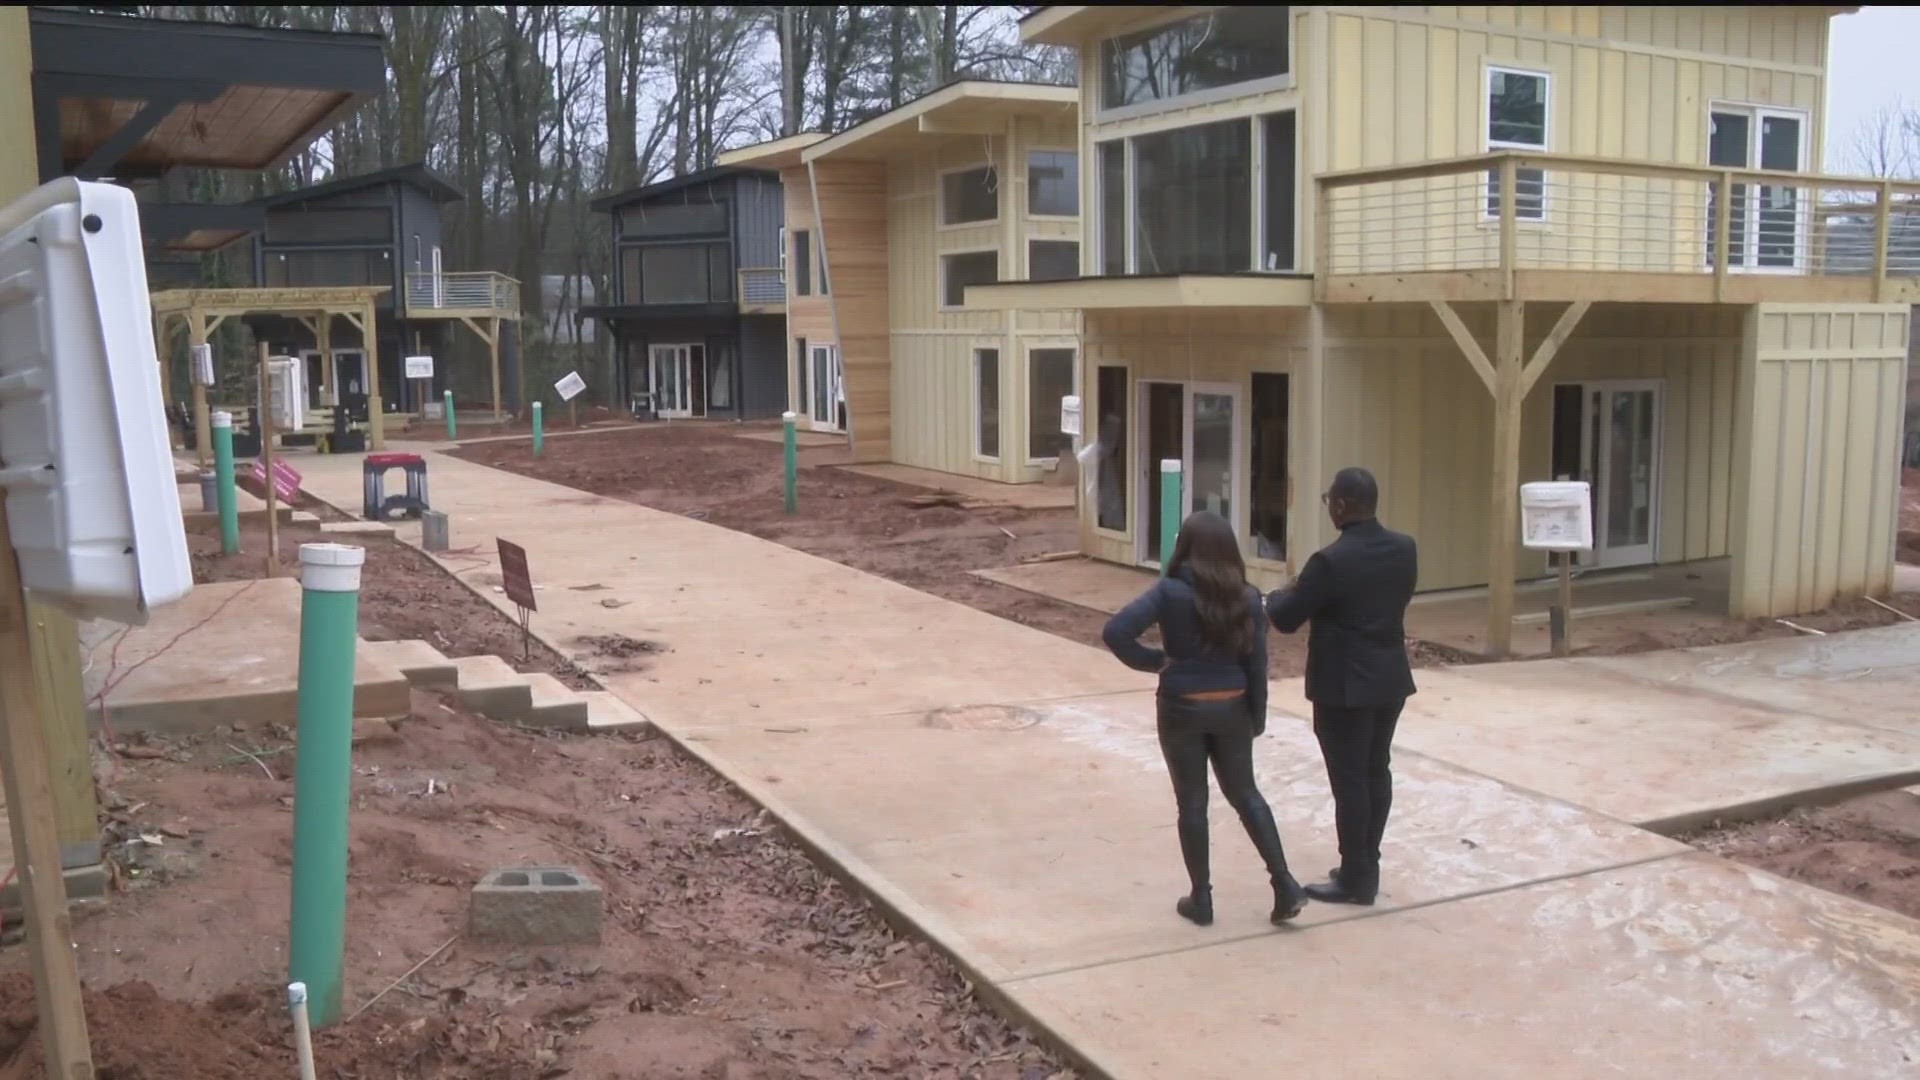 Fulton County is currently working with the City of College Park for a tiny homes pilot program. Commissioners already approved $1 million to put toward the program.